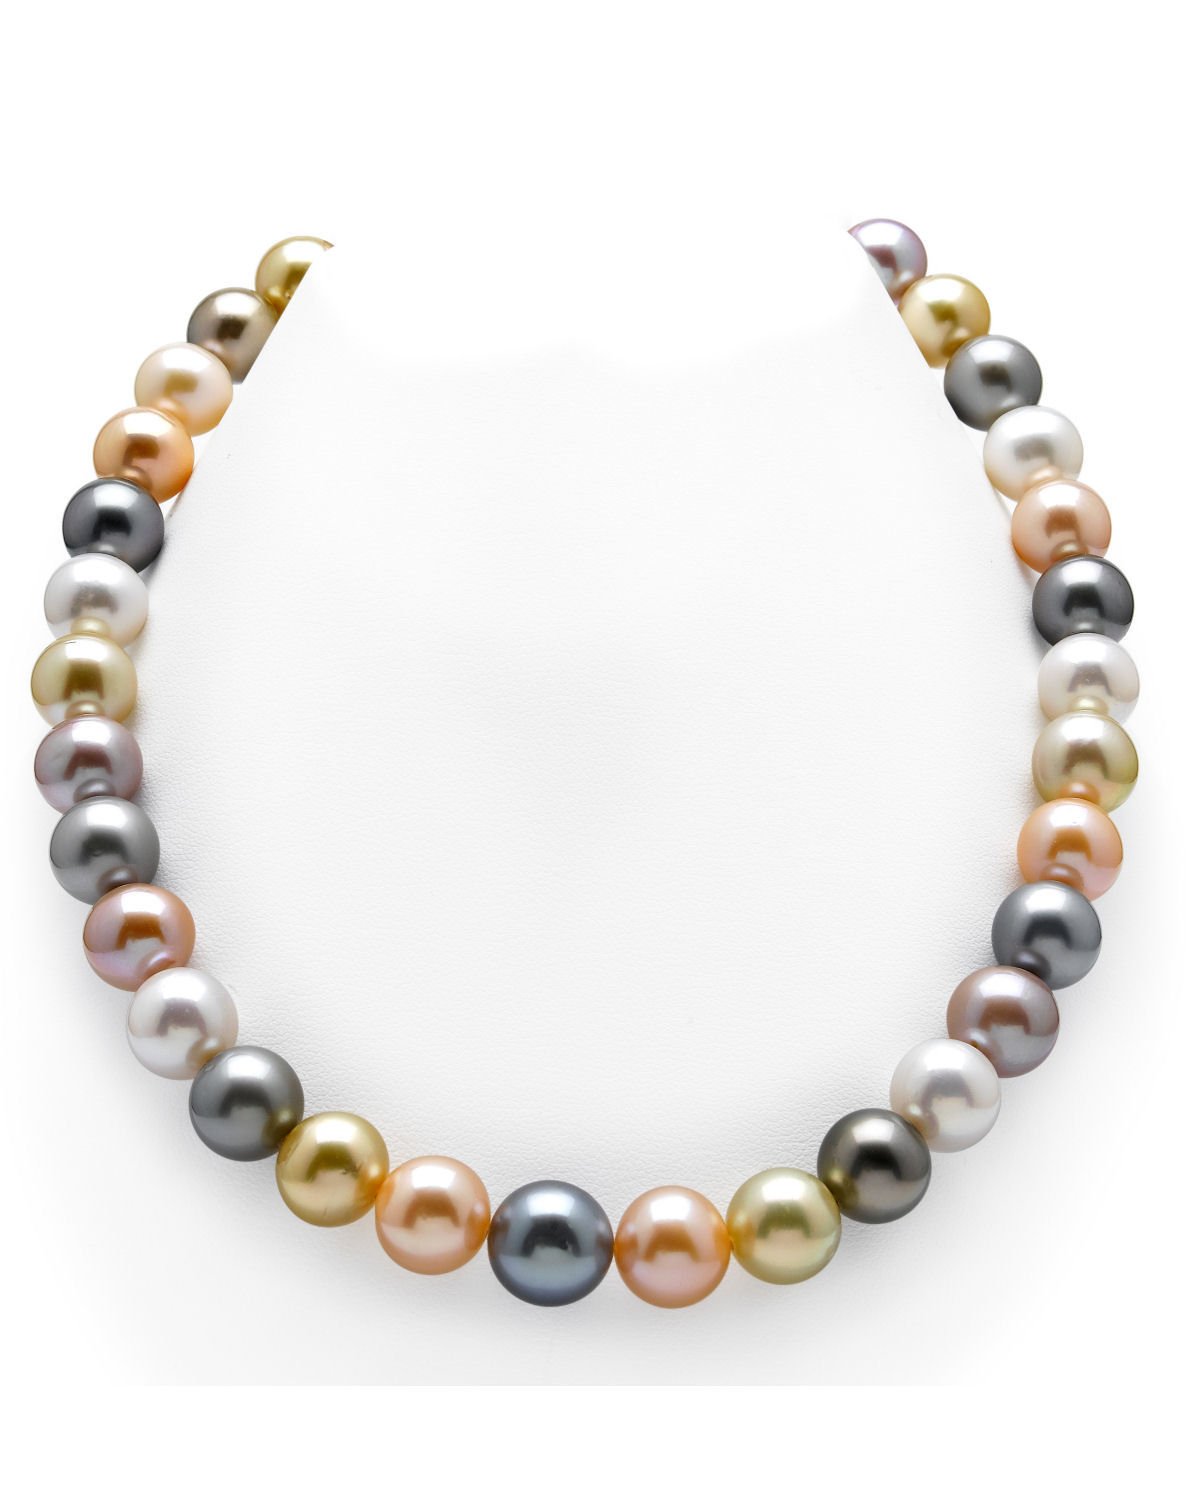 10-12mm South Sea & Freshwater Multicolor Pearl Necklace - AAA